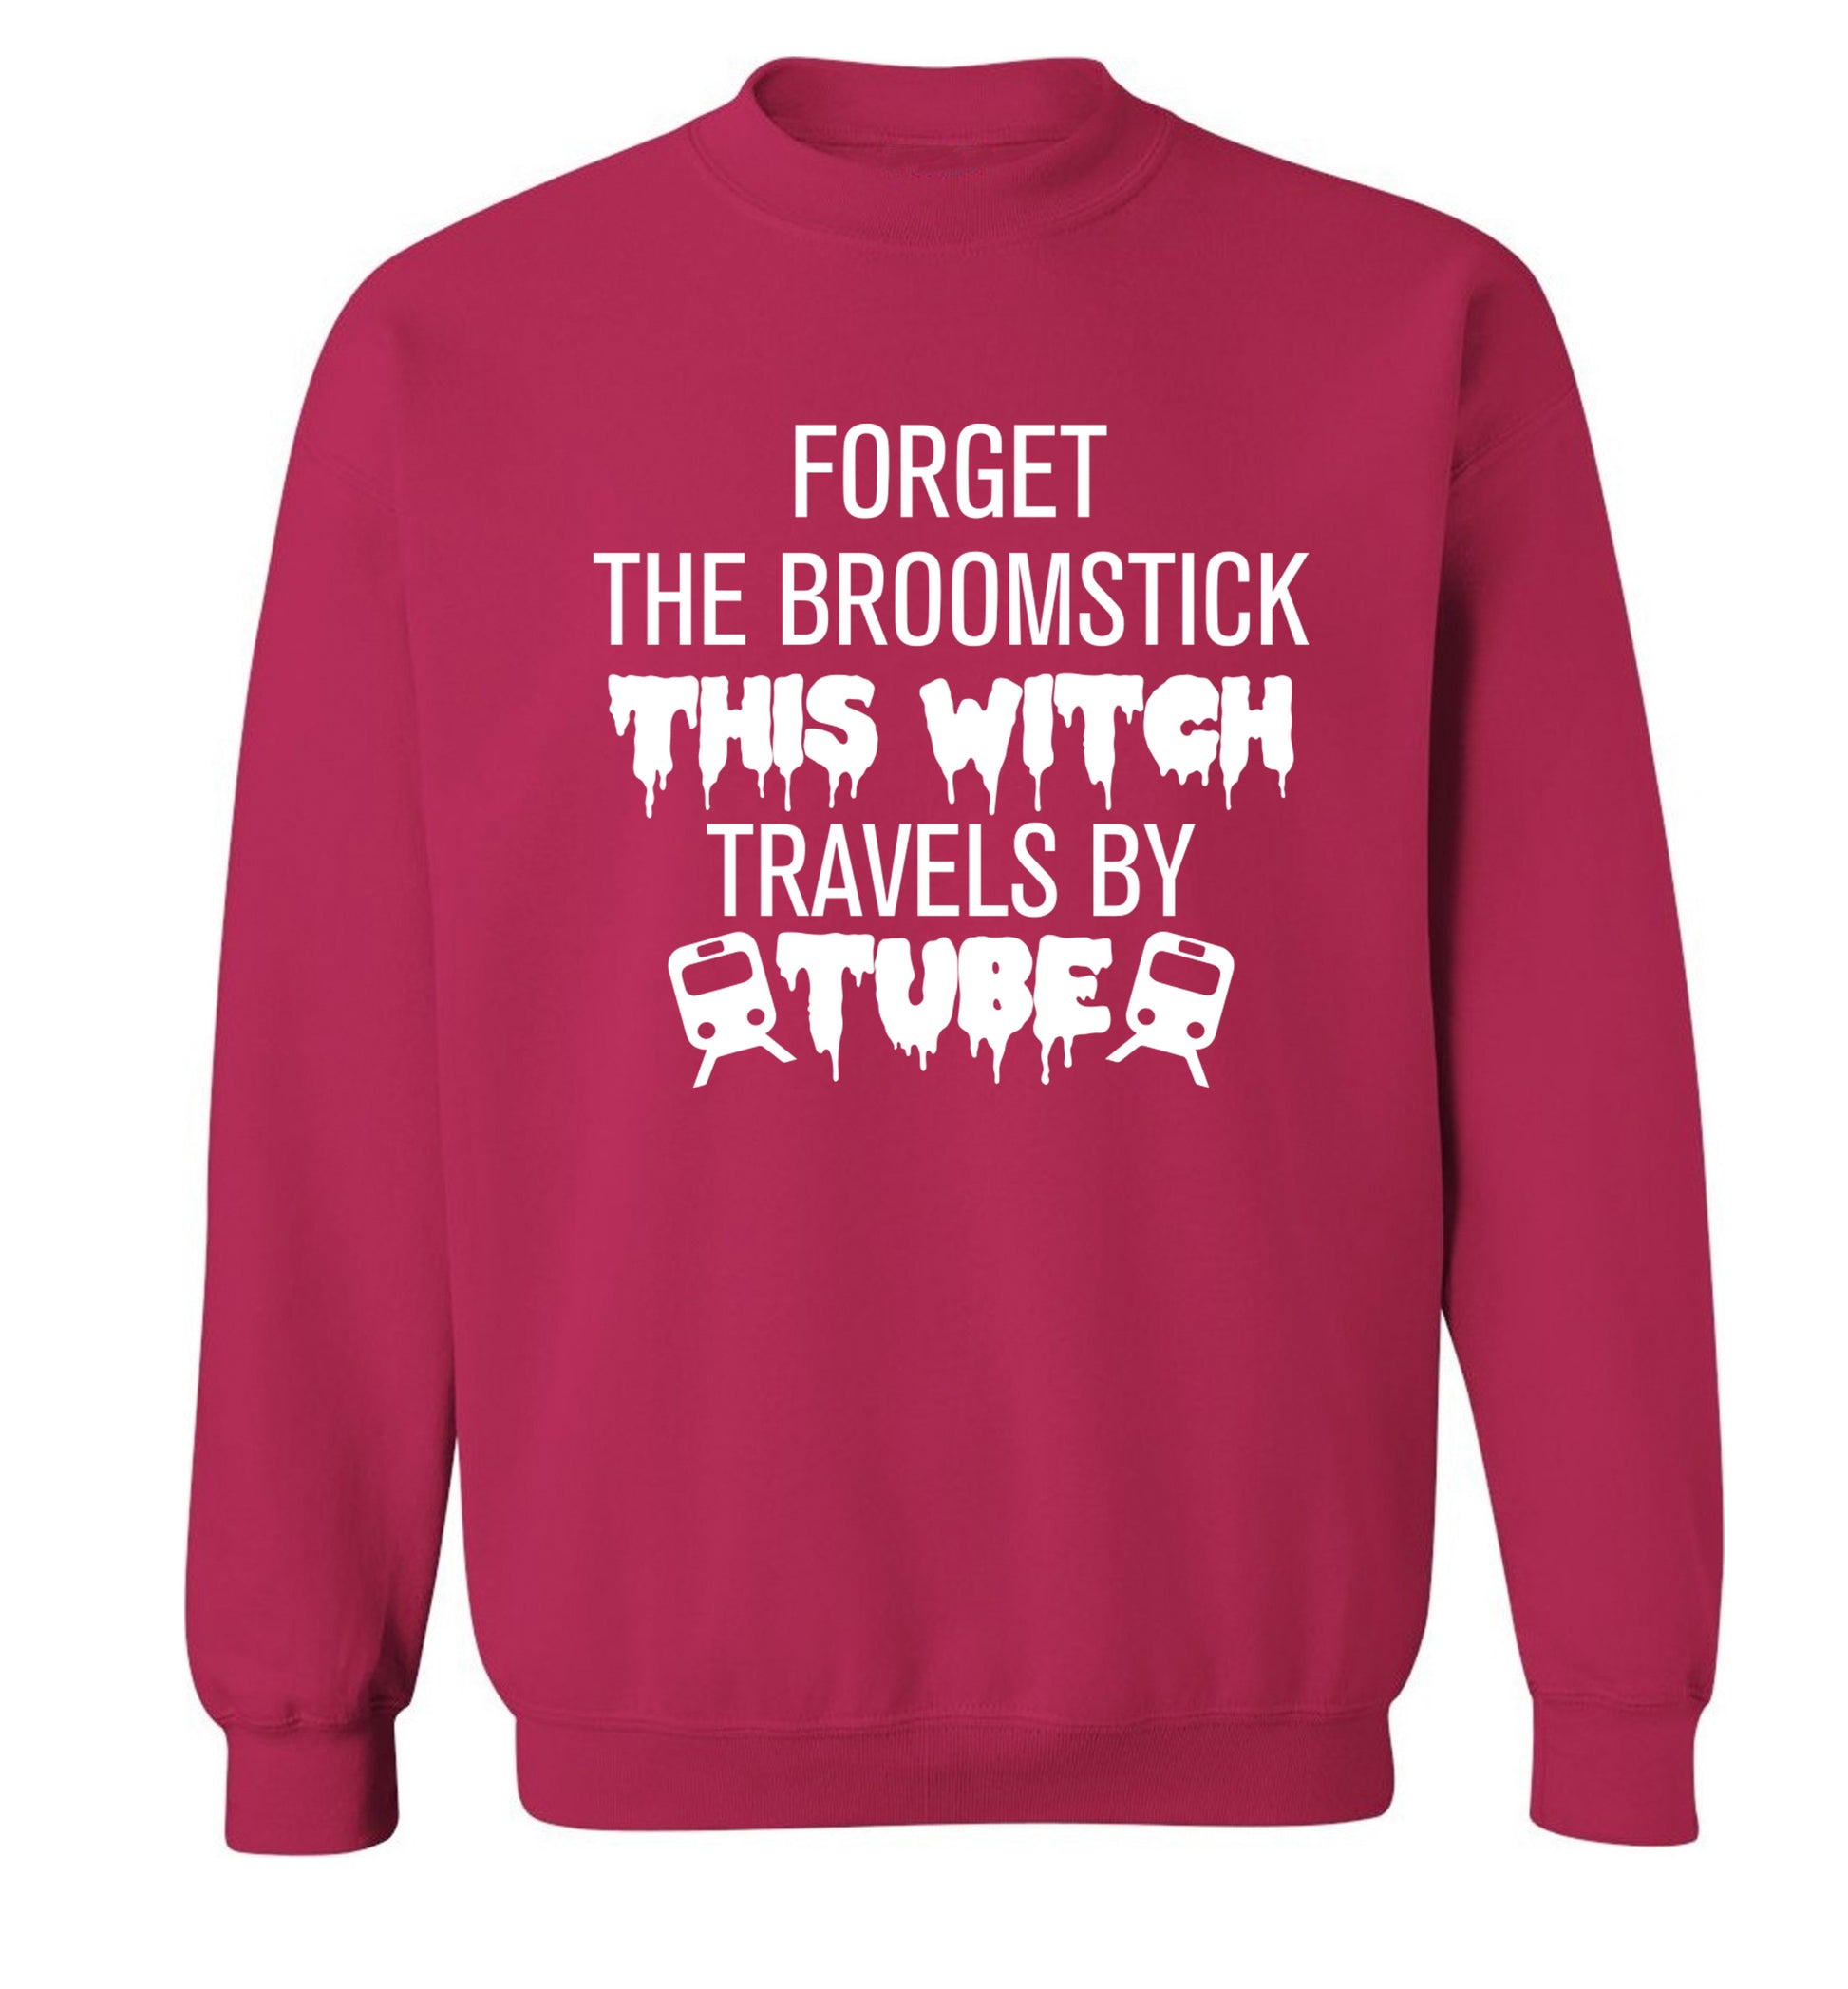 Forget the broomstick this witch travels by tube Adult's unisexpink Sweater 2XL